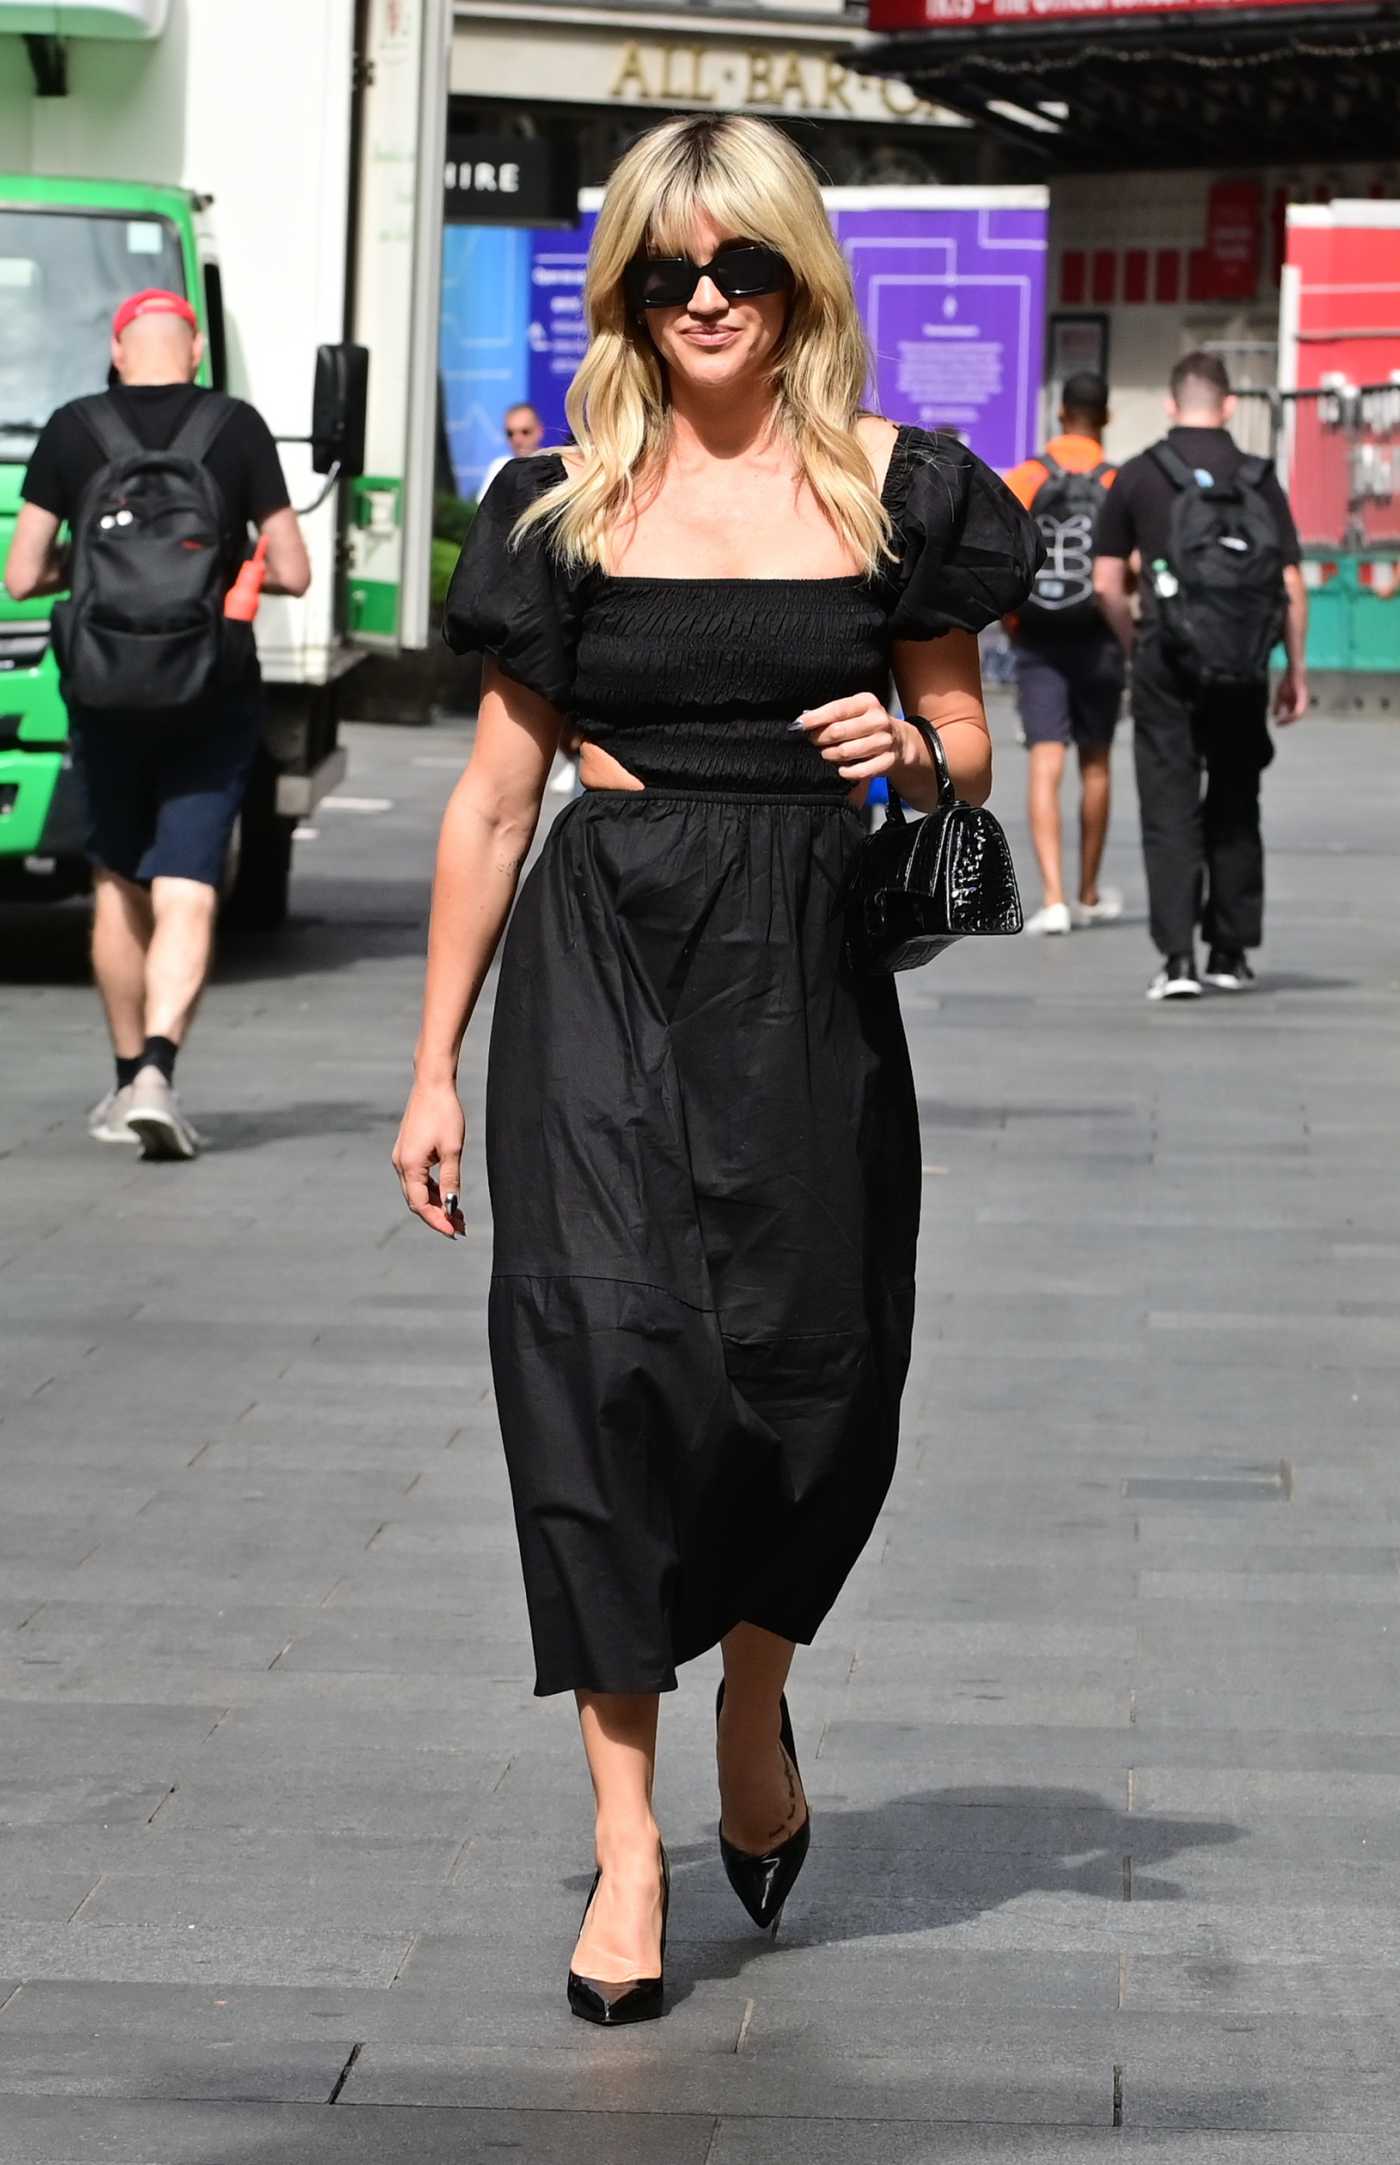 Ashley Roberts in a Black Dress Leaves the Global Radio at Leicester Square in London 07/13/2022